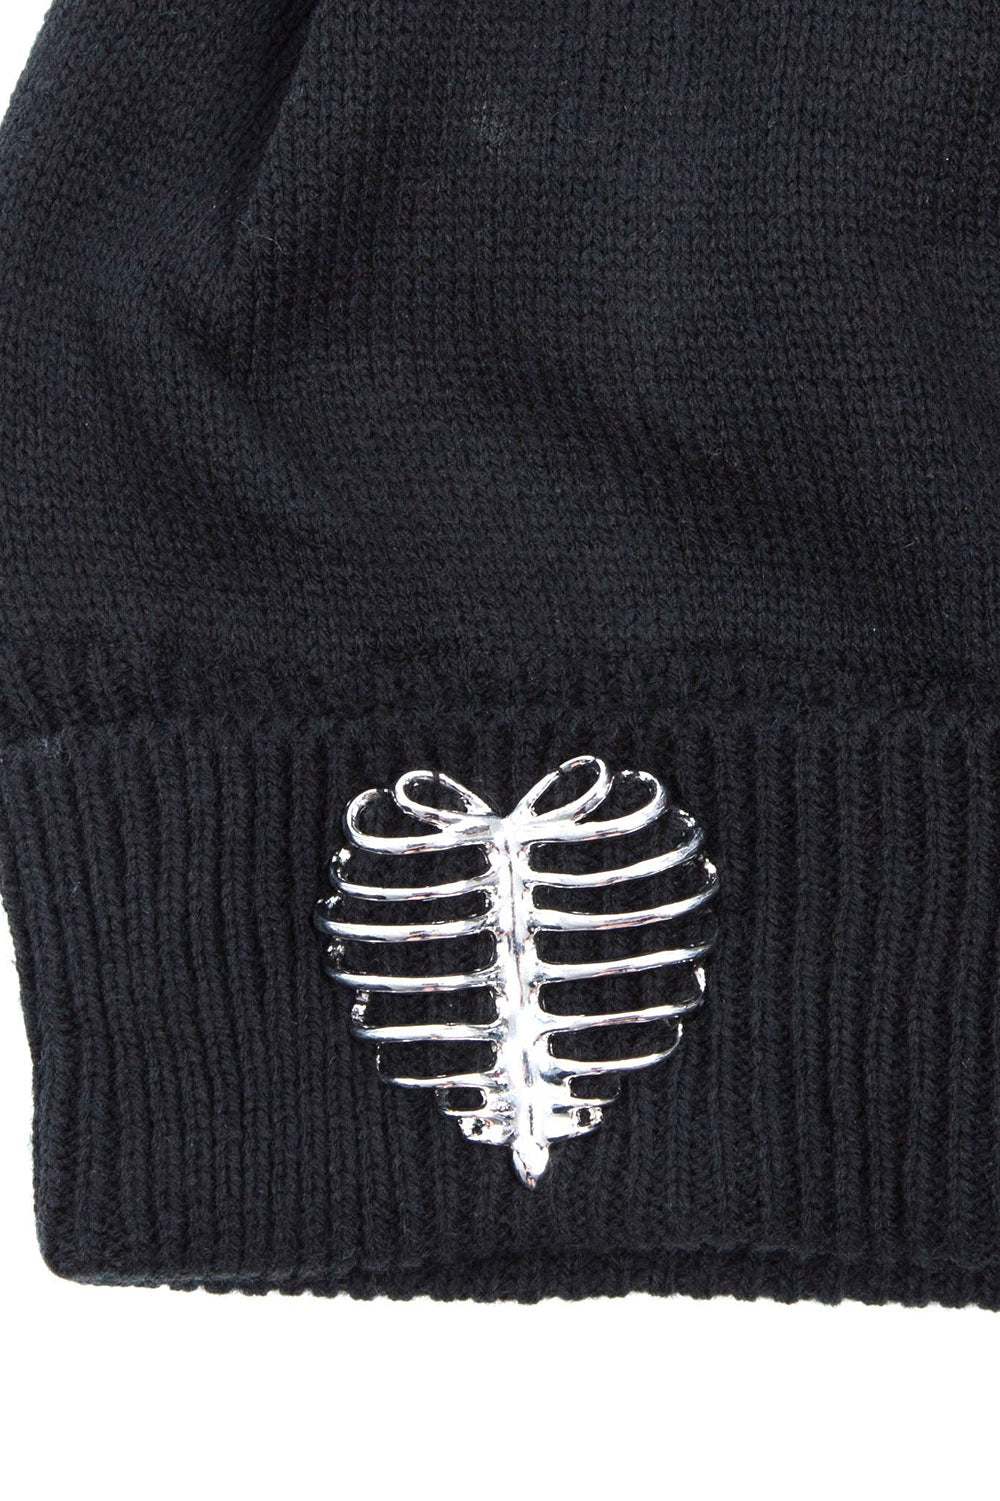 ribbed beanie with silver ribcage charm